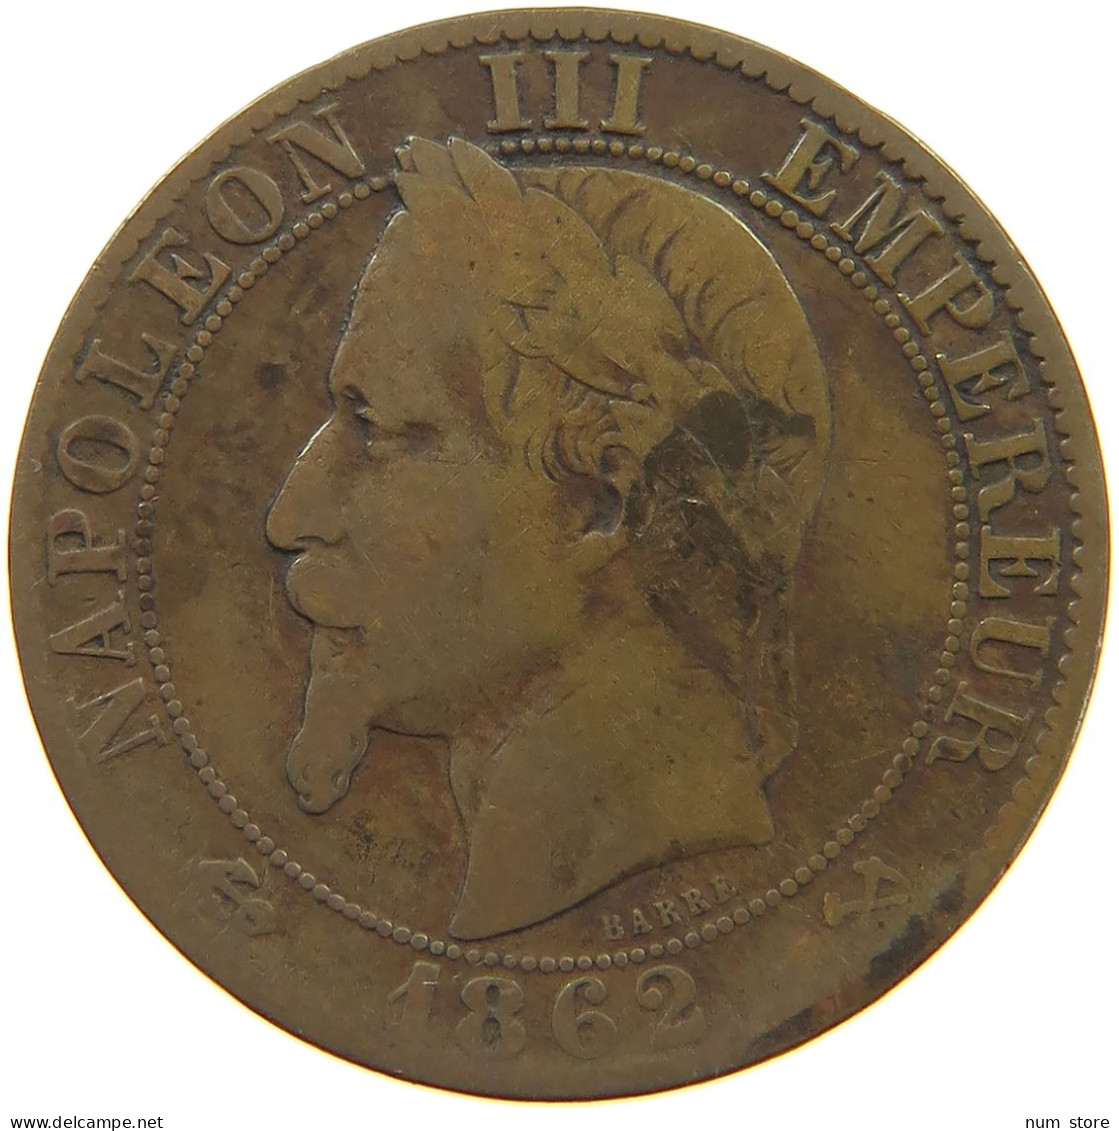 FRANCE 5 CENTIMES 1862 K Napoleon III. (1852-1870) #a042 0161 - 5 Centimes